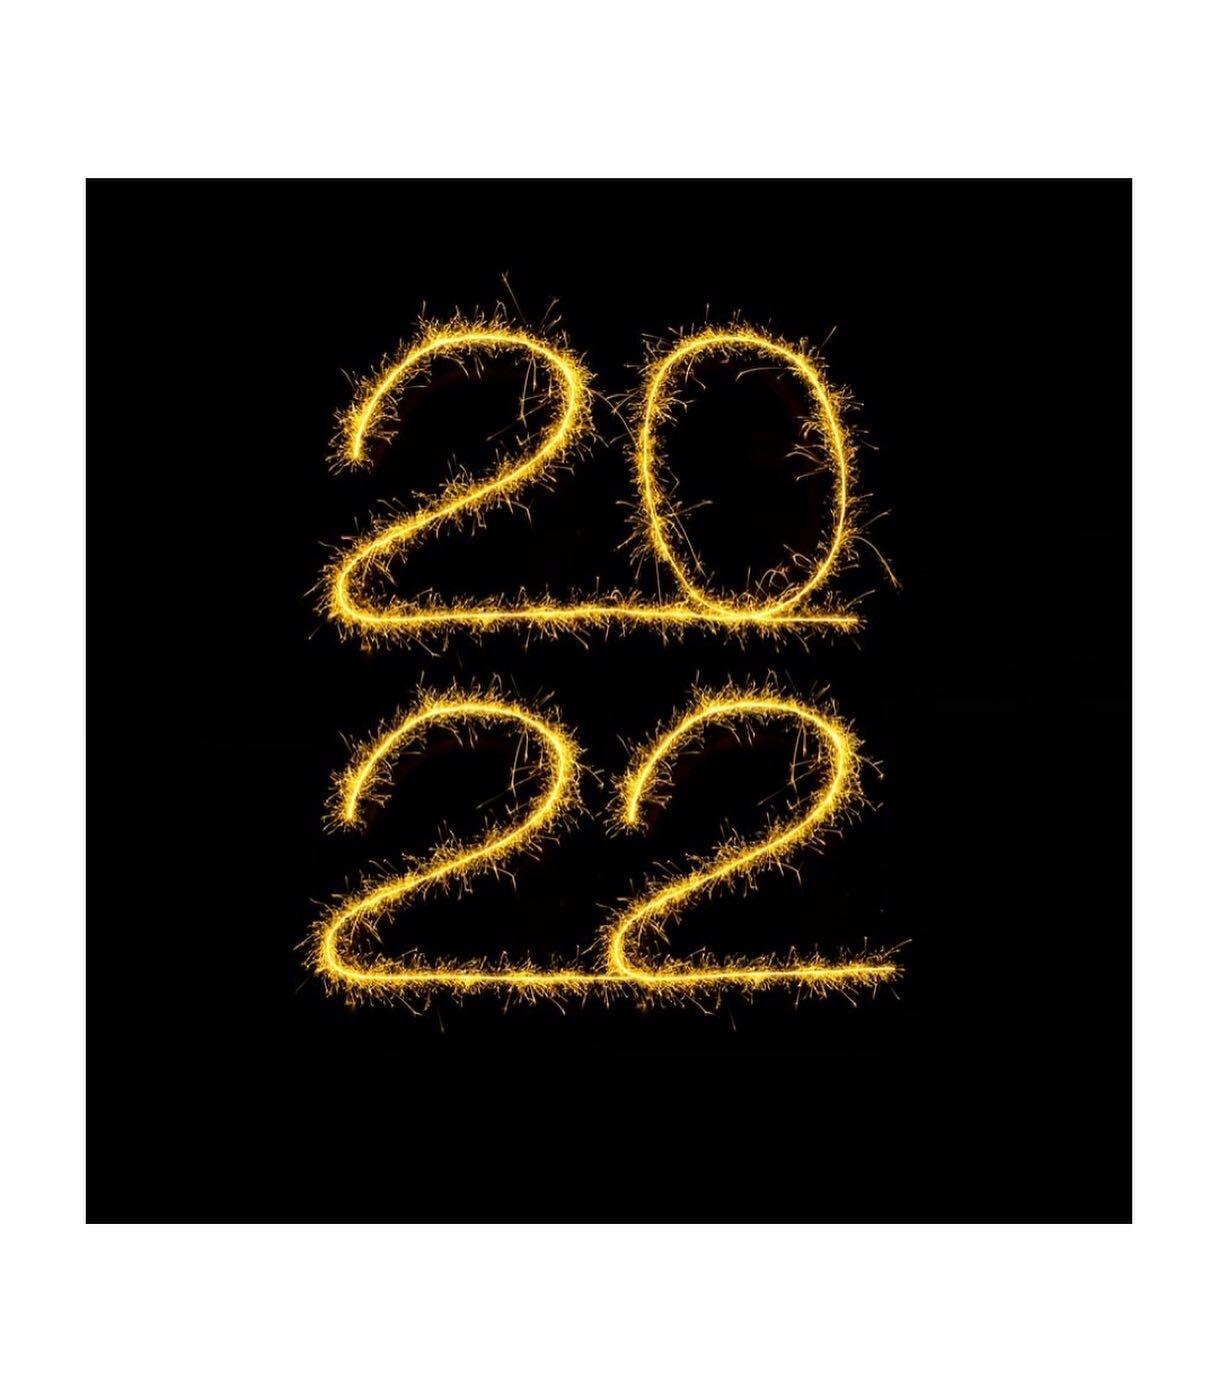 Wrapping up our year end with a huge shout out to all our clients, collaborators, partners and supporters. You have definitely helped us flourish over the past year. 

We can&rsquo;t wait to see what #2022 brings to the scene. 

Have a safe and happy